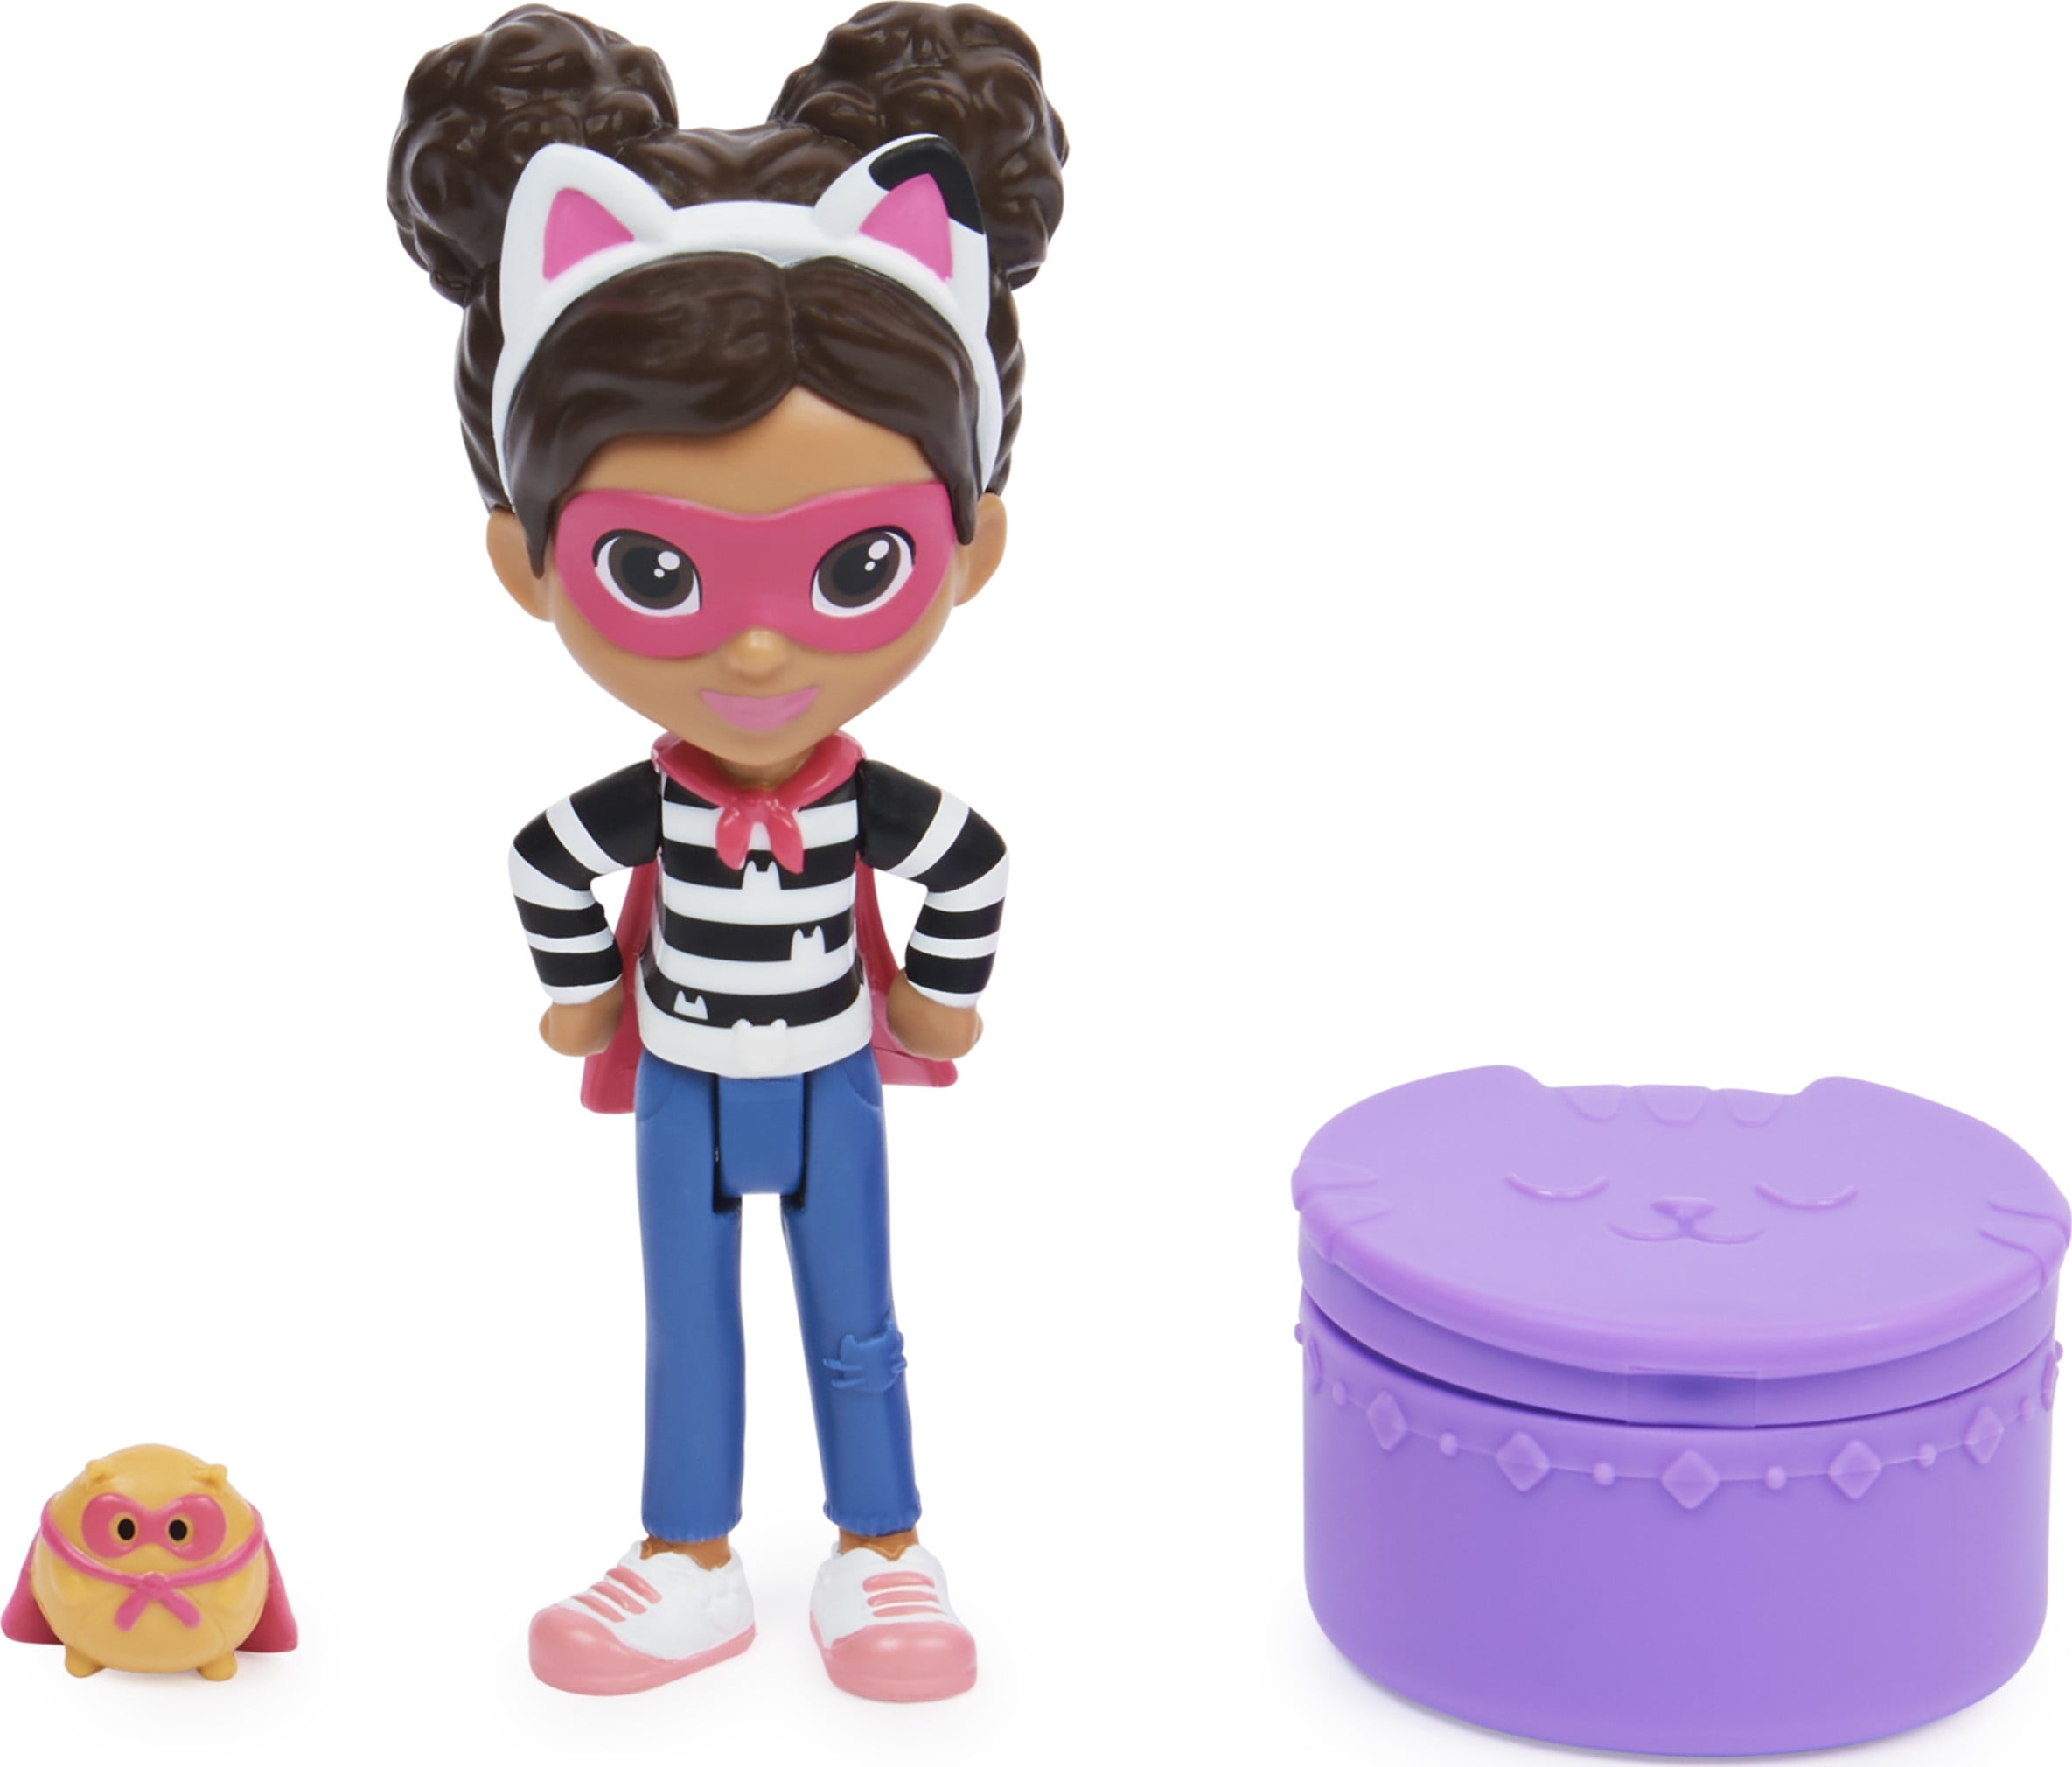  Gabby's Dollhouse, Gabby Girl and Kico the Kittycorn Toy  Figures Pack, with Accessories and Surprise Kids Toys for Ages 3 and up :  Toys & Games